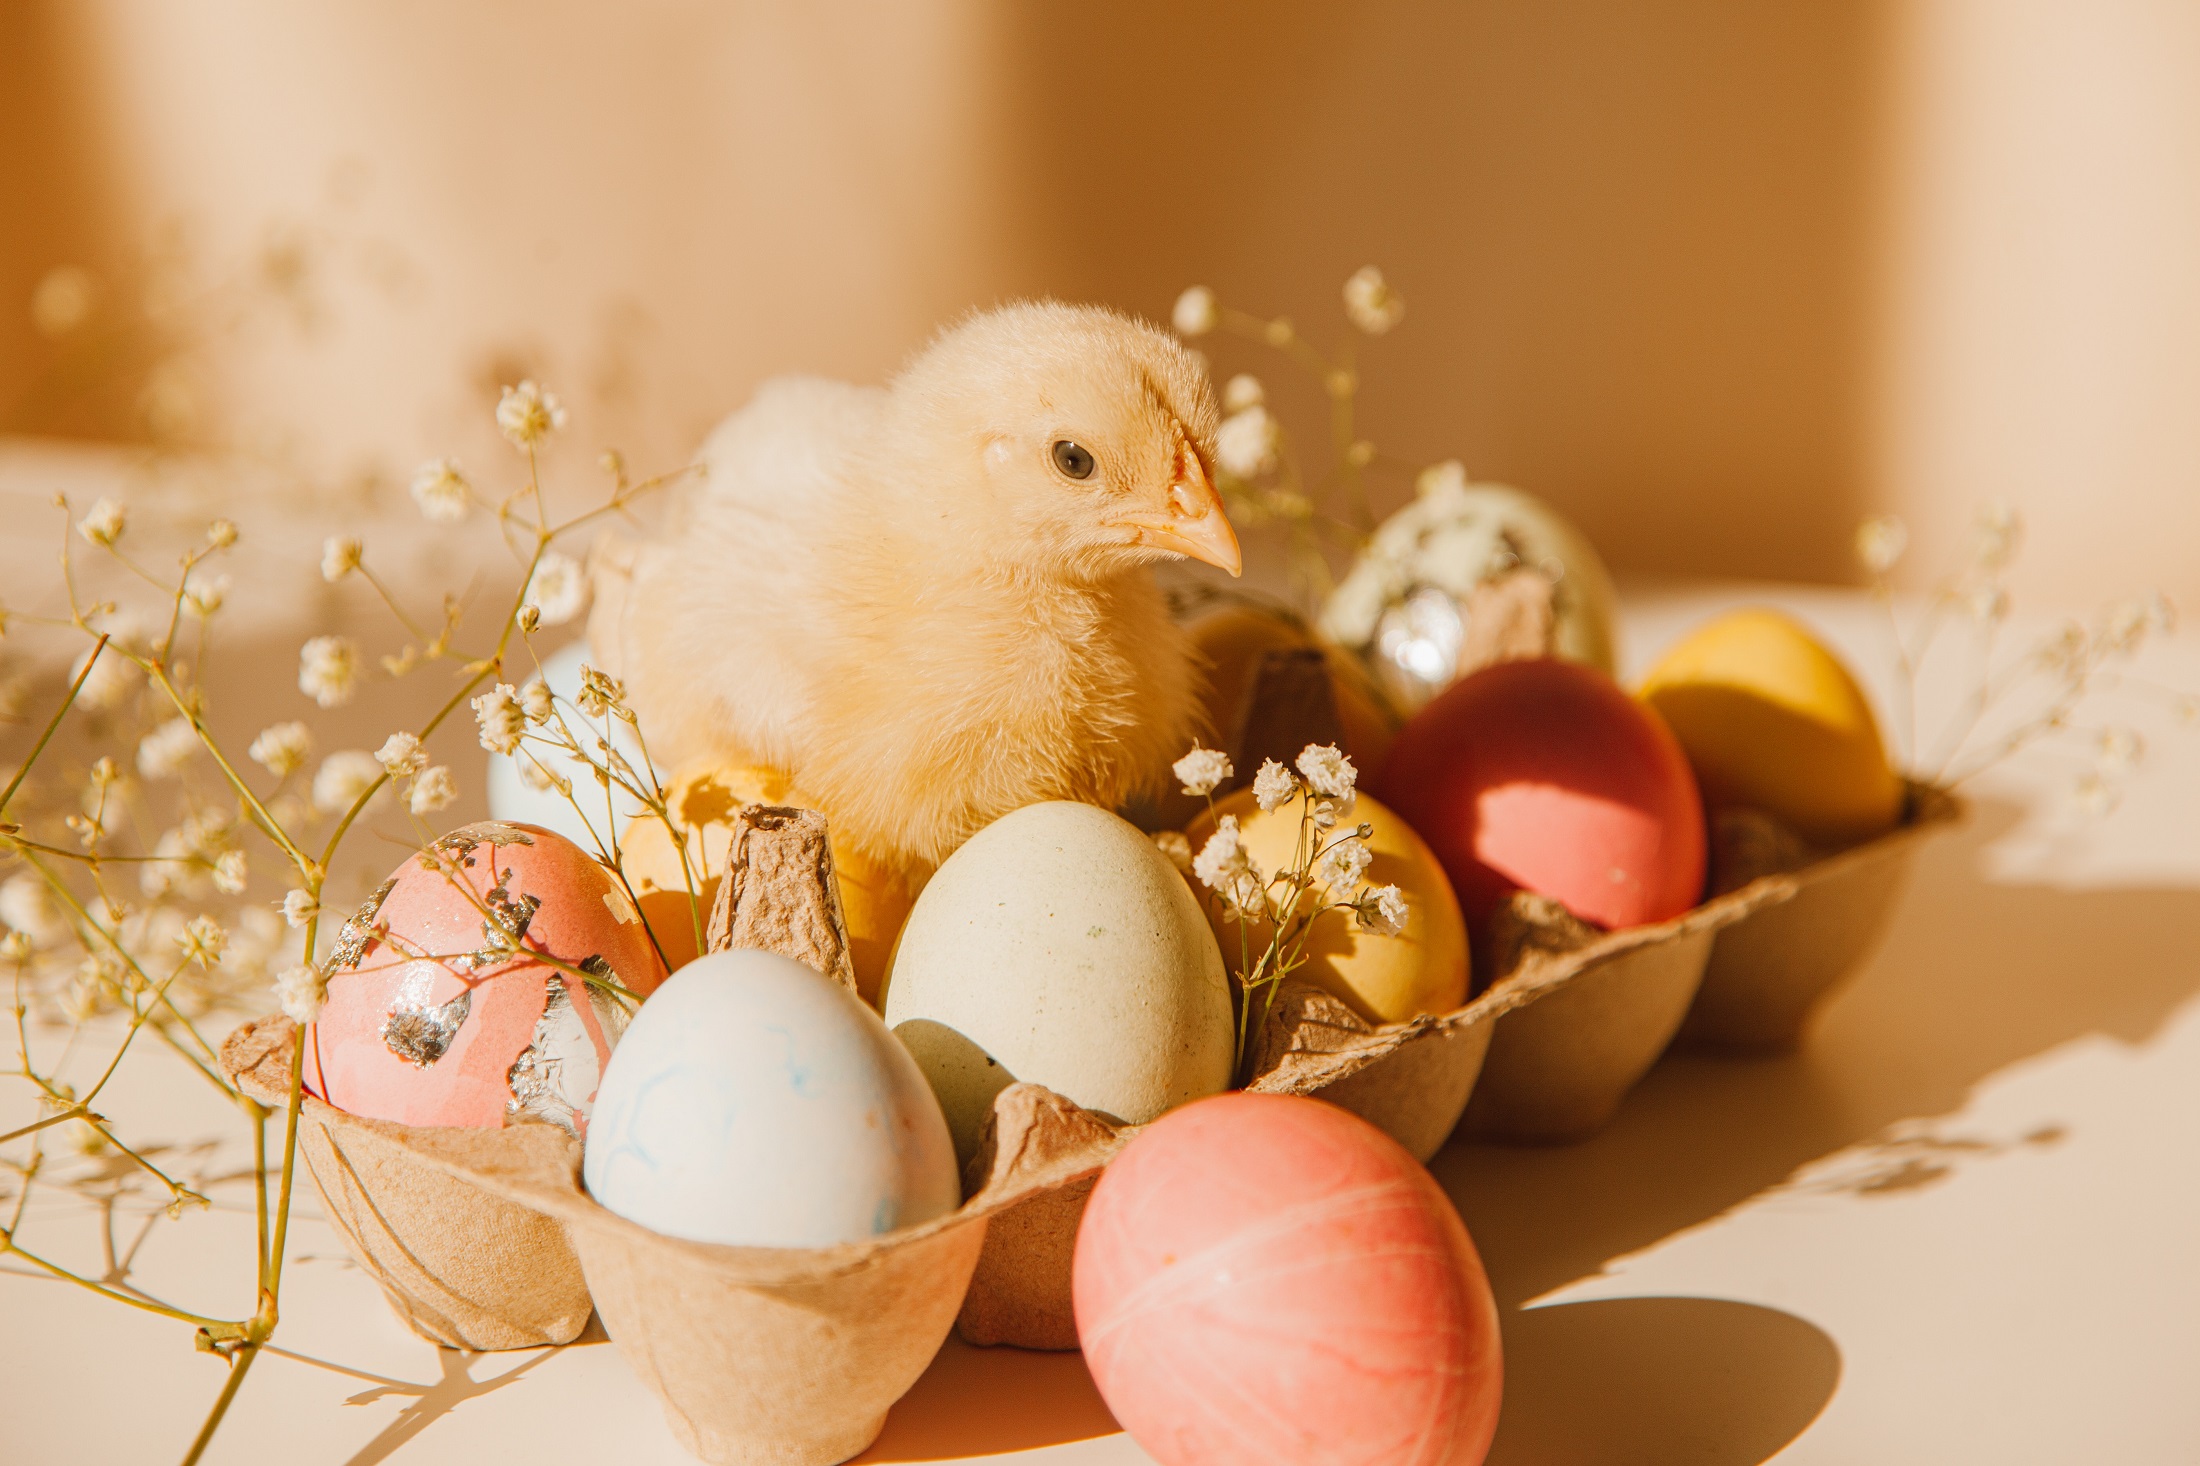 Easter in the light version – we suggest what is safe for your waistline on the Easter table